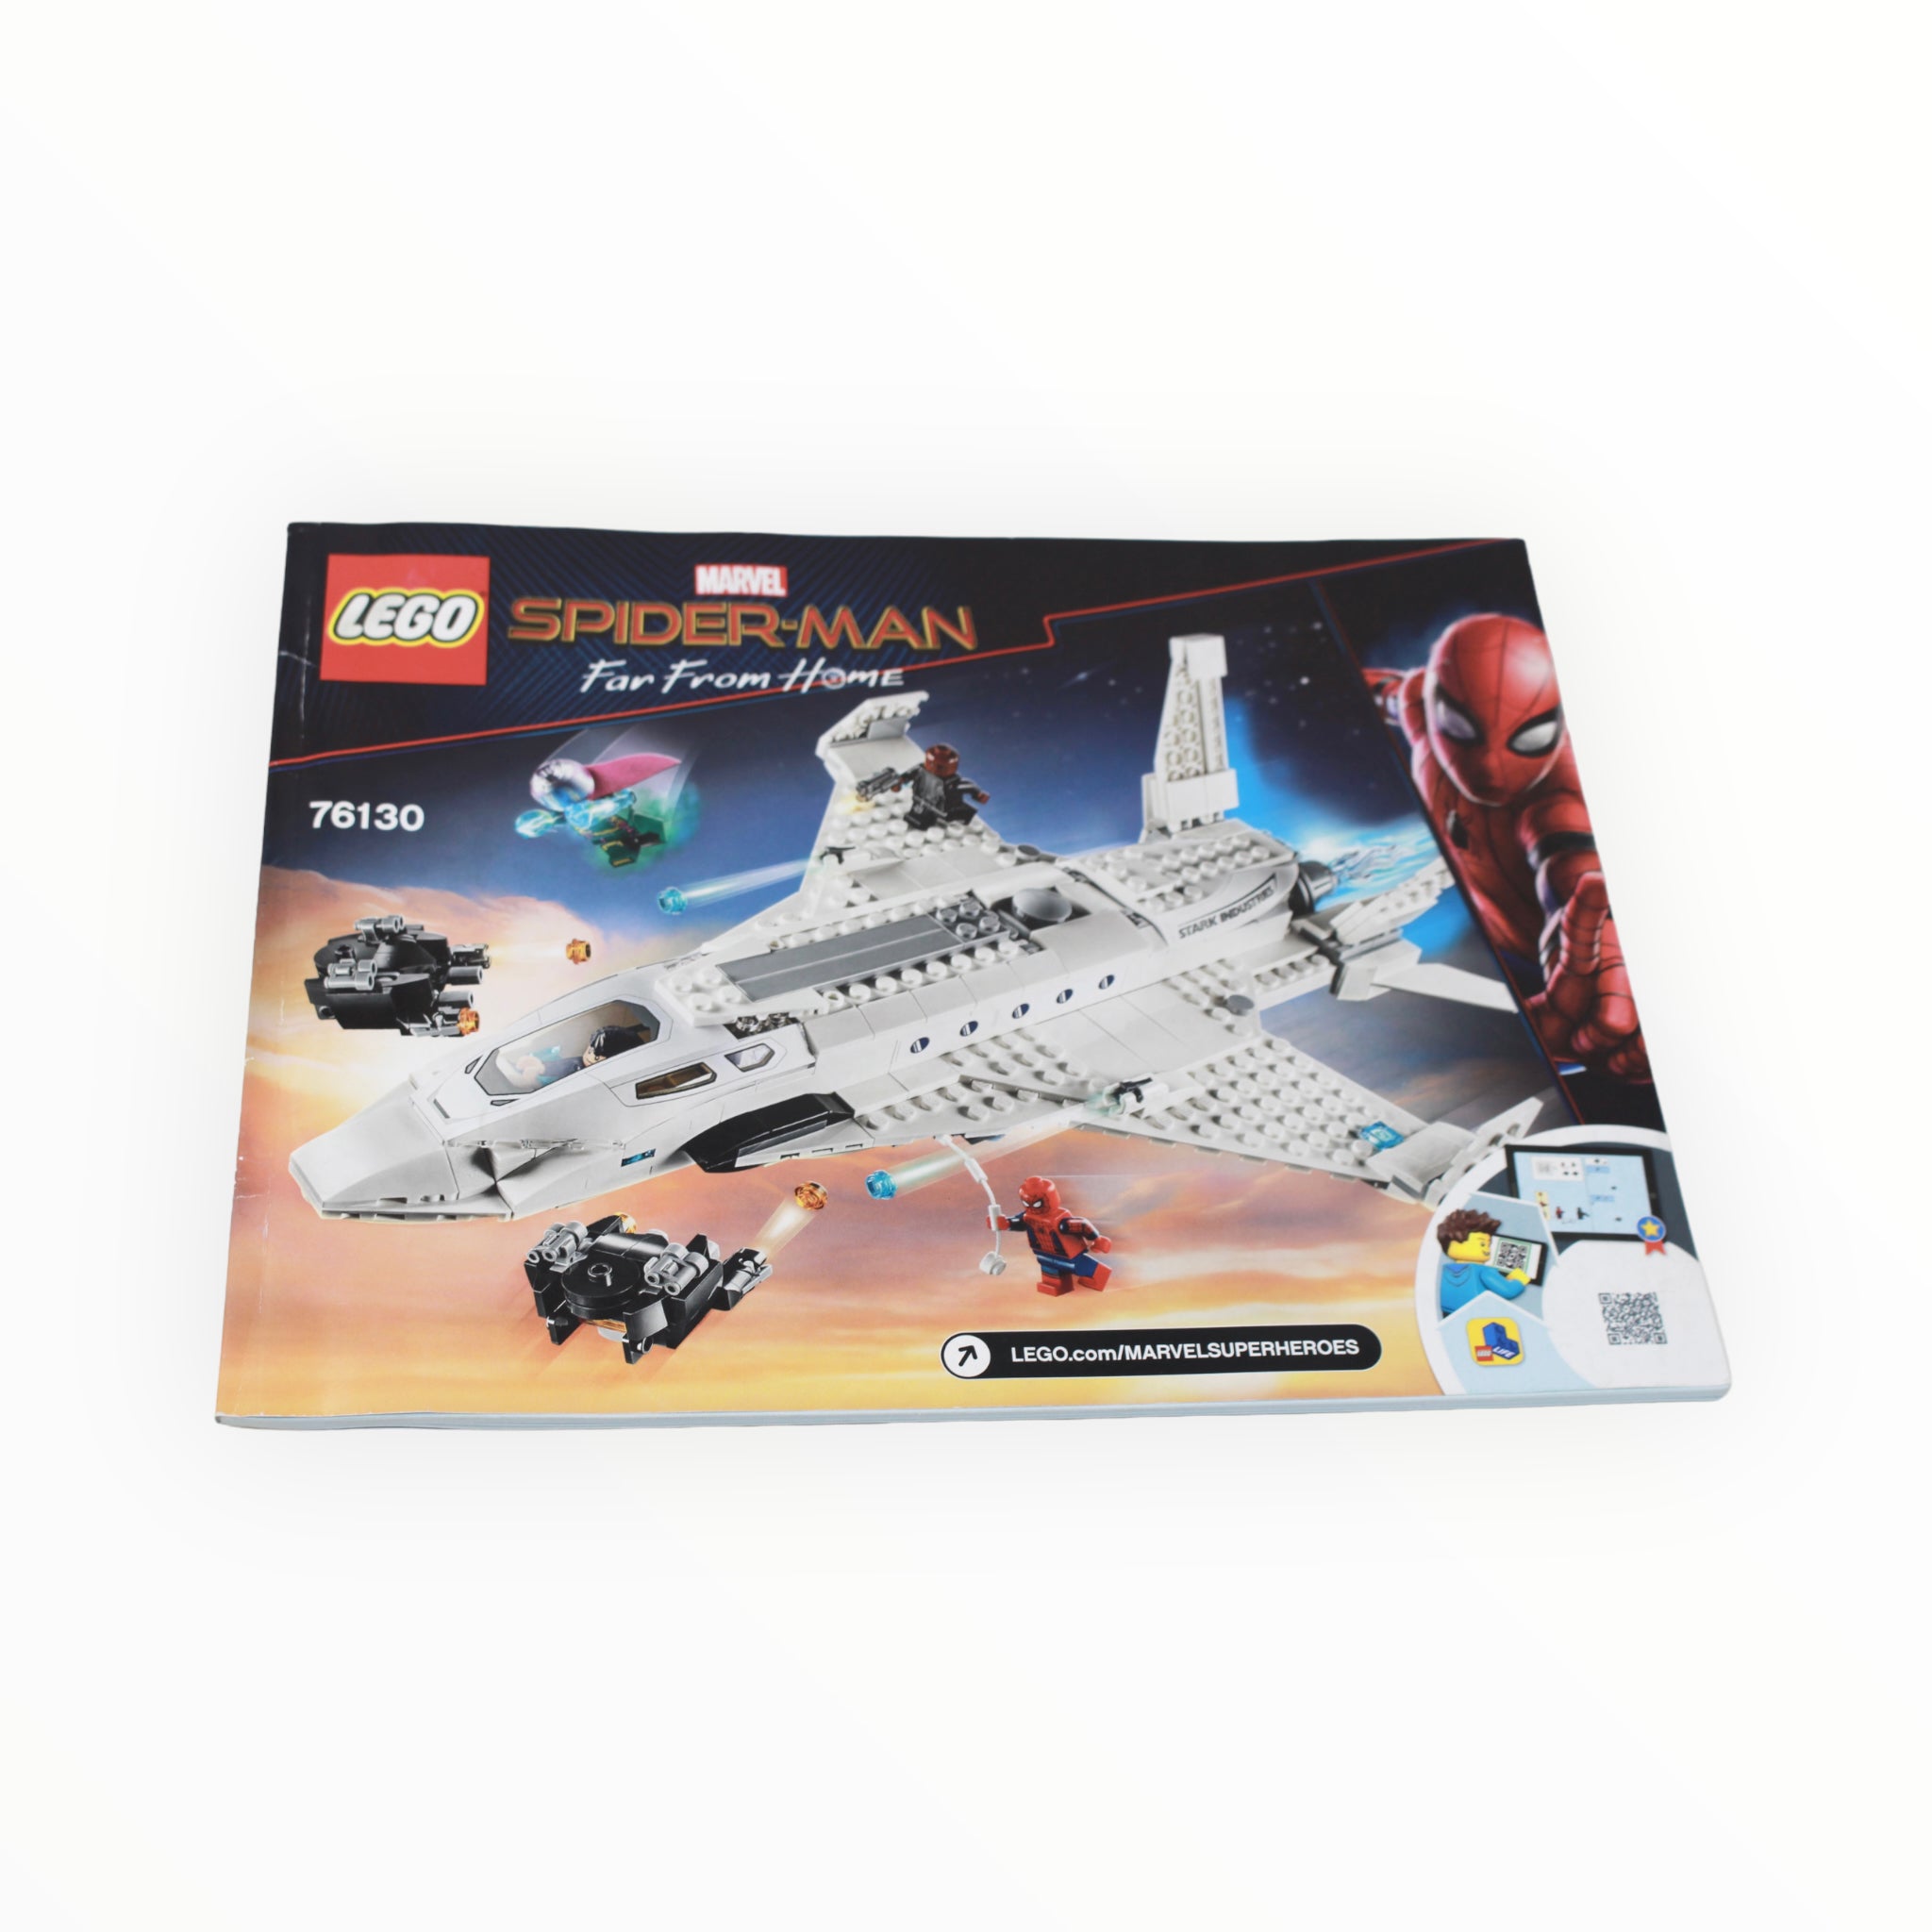 Used Set 76130 Spider-Man: Far From Home Stark Jet and the Drone Attack